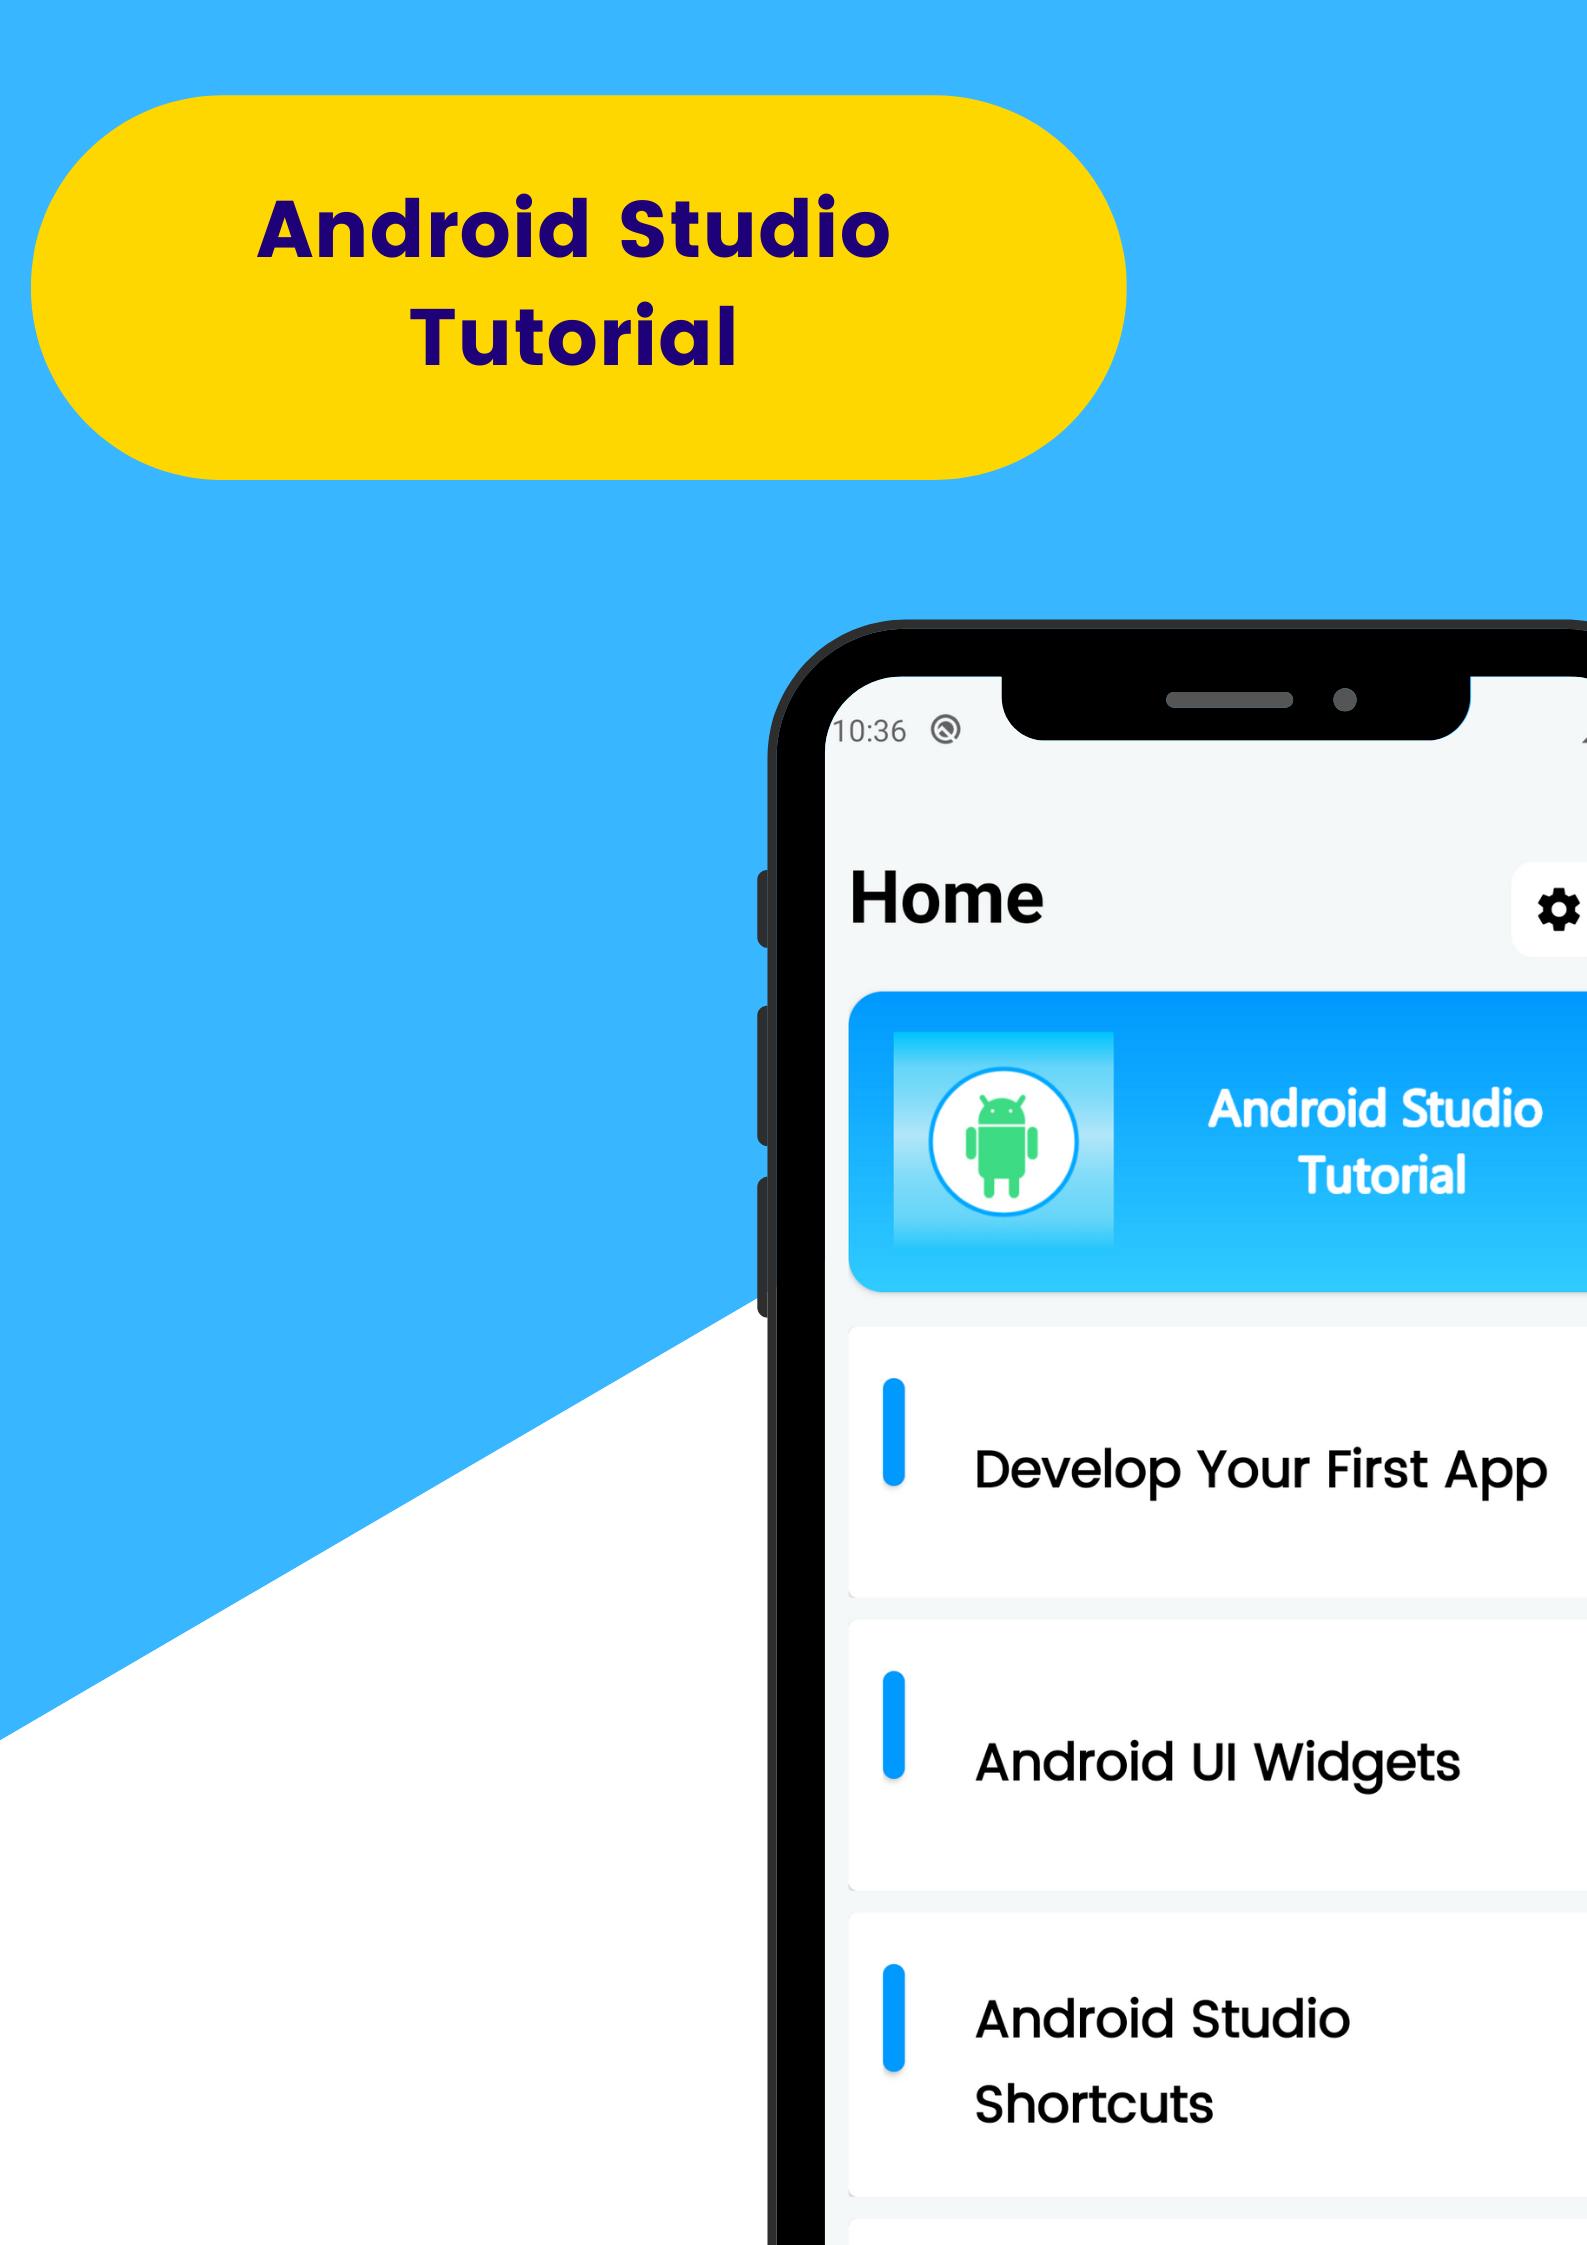 Android Studio Tutorial for Android - APK Download